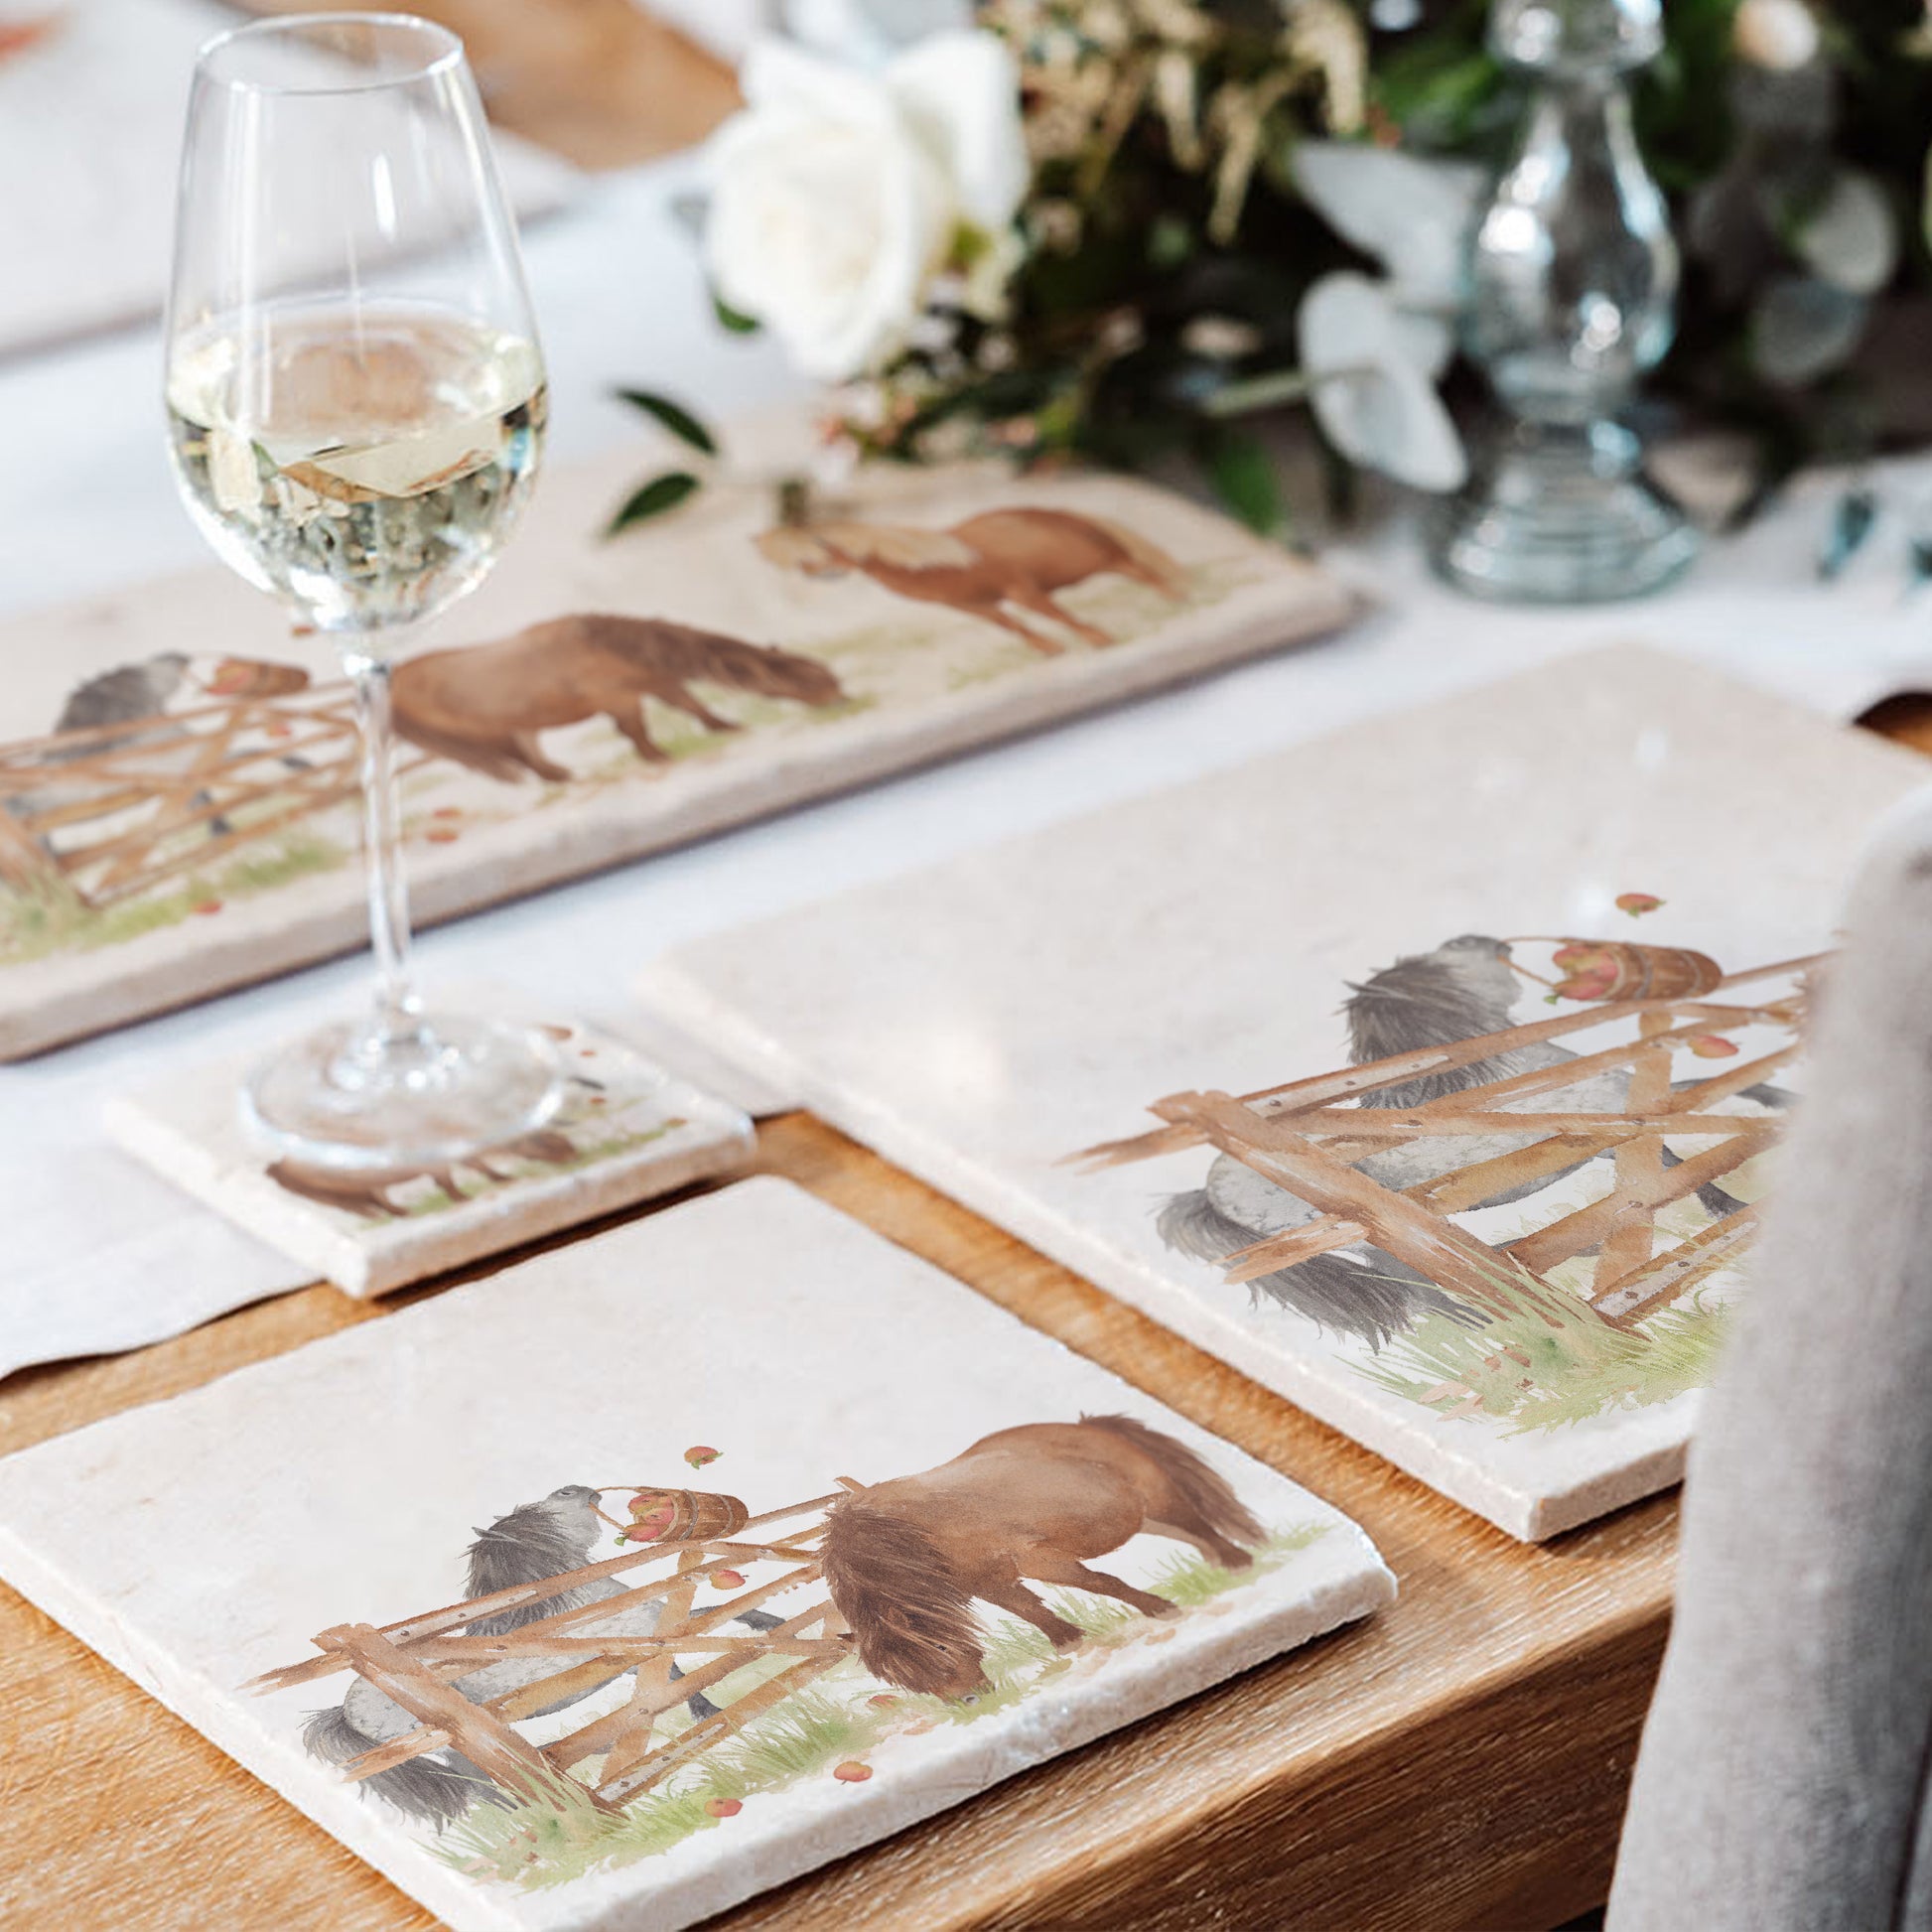 A rustic country table set with marble placemats and platters, all featuring a watercolour design of cheeky Shetland ponies stealing apples.